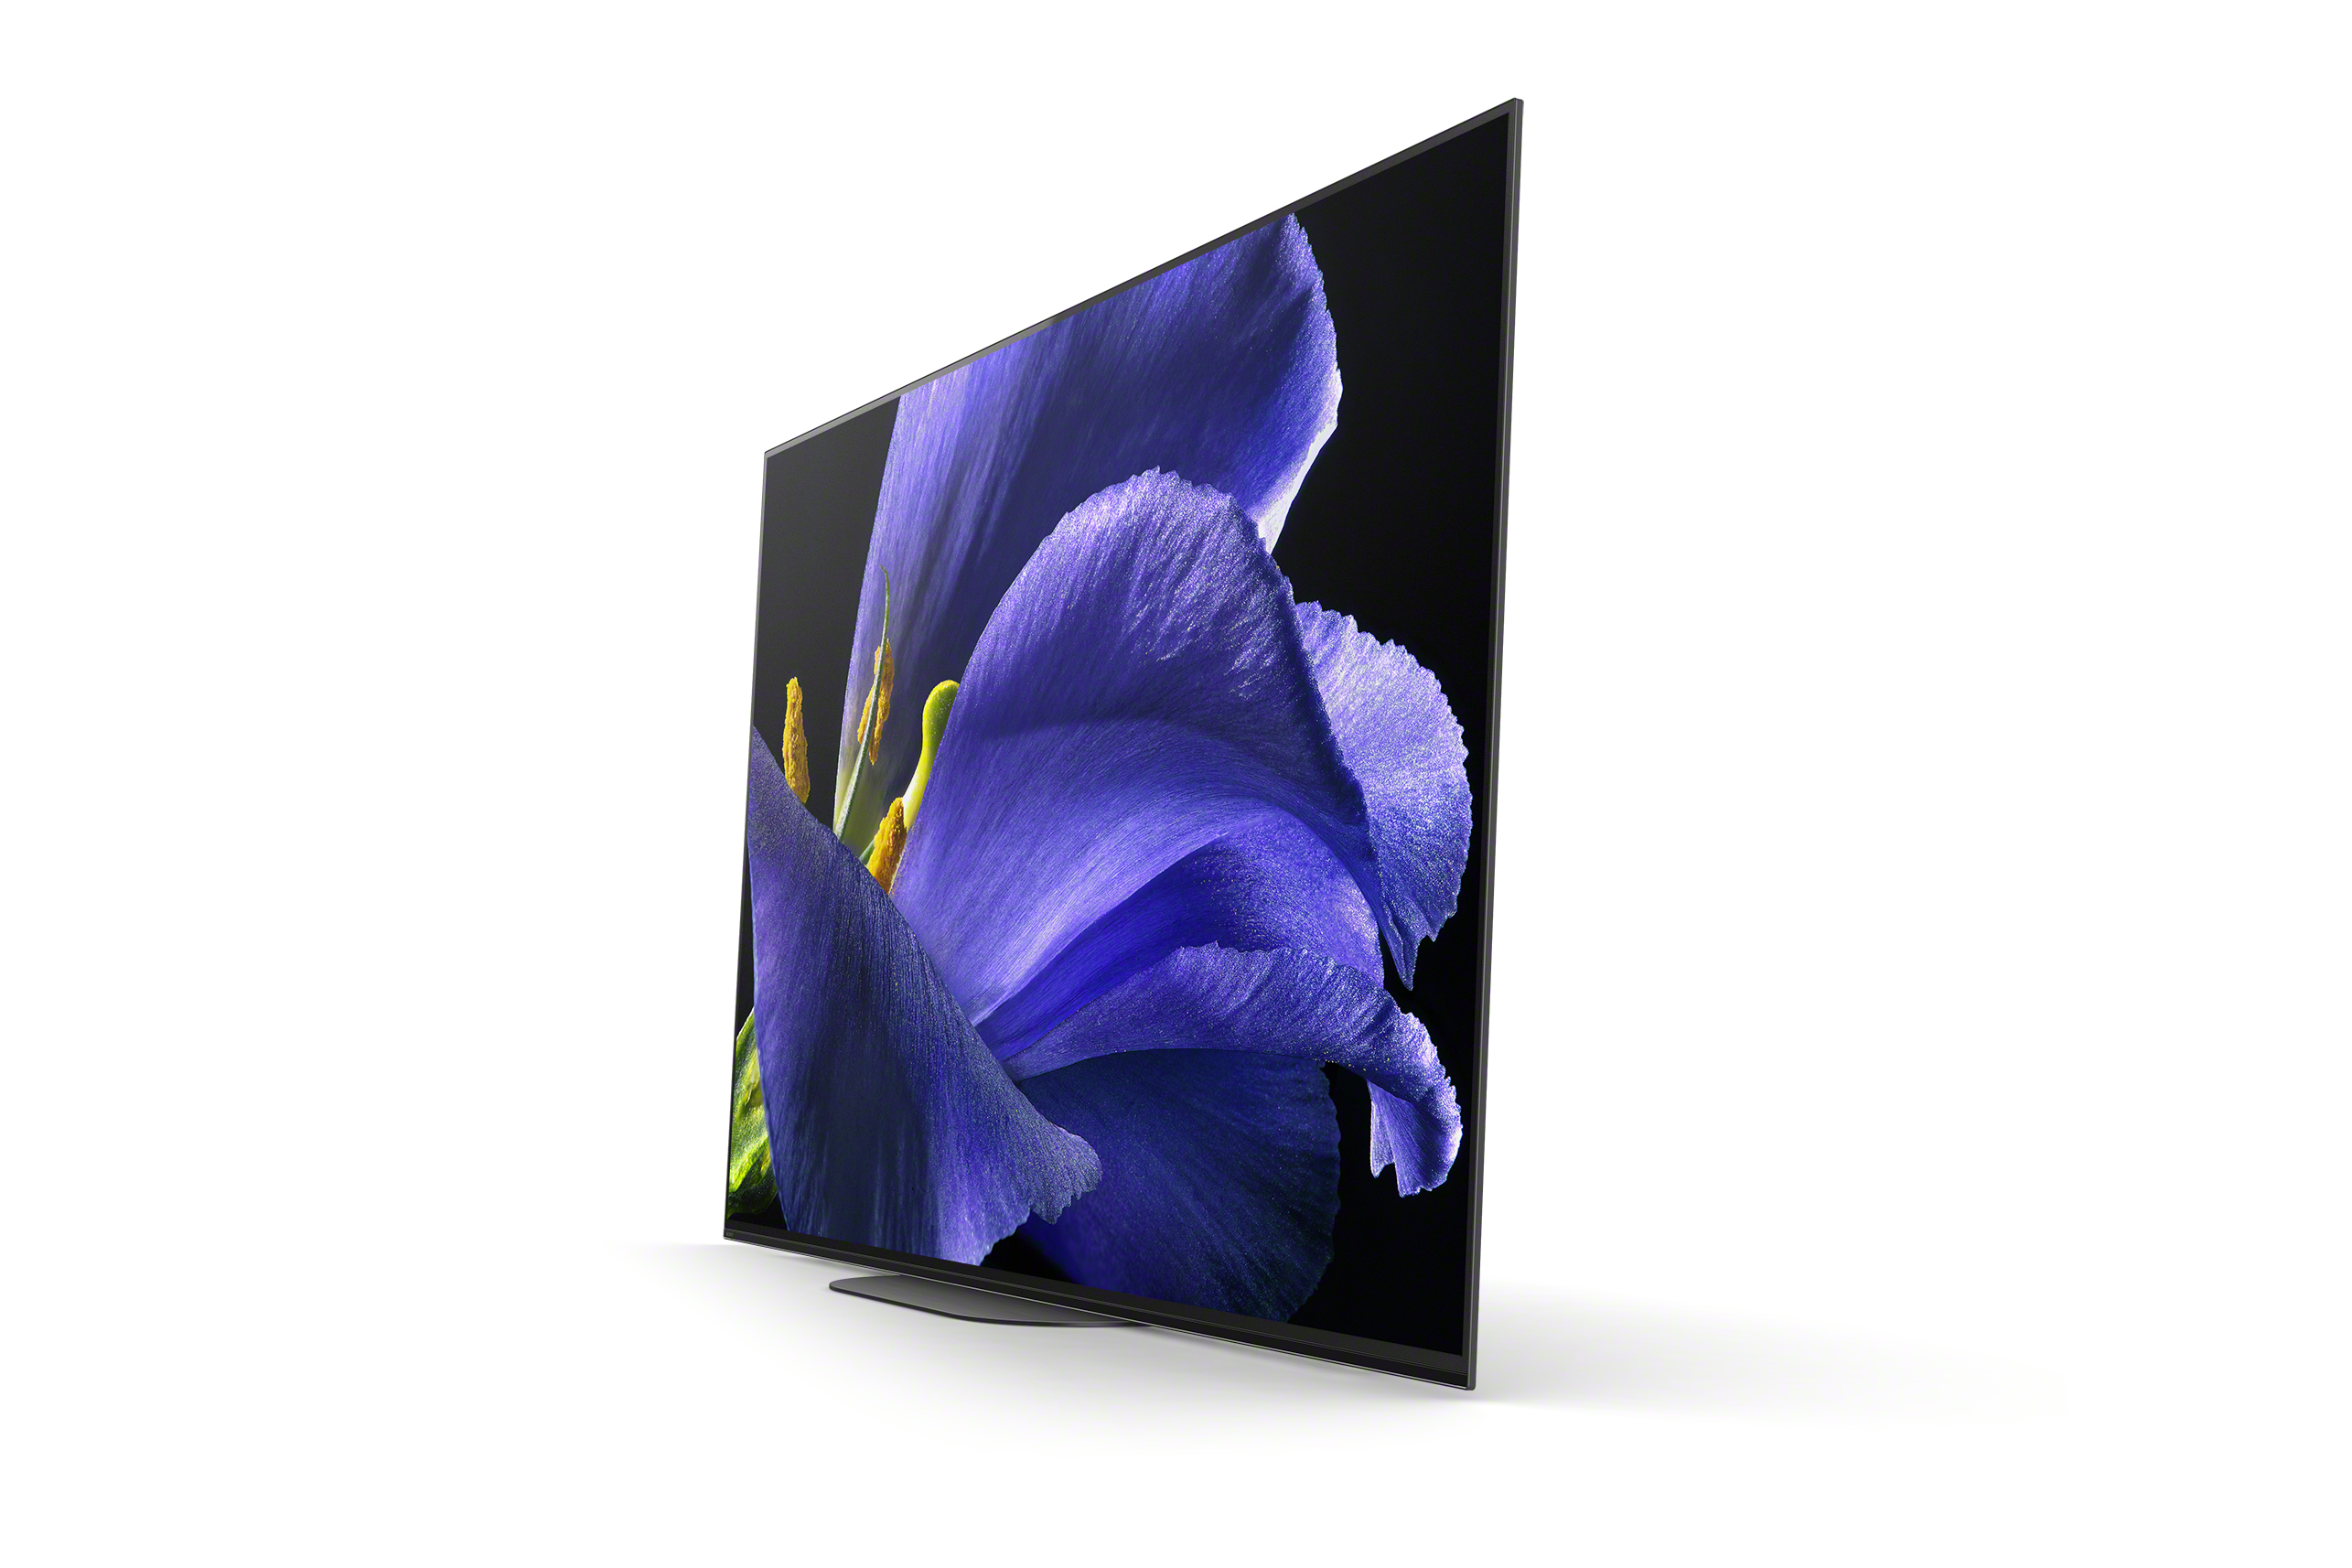 Sony 65" Class XBR65A9G 4K UHD OLED Android Smart TV HDR BRAVIA A9G Series - image 4 of 15